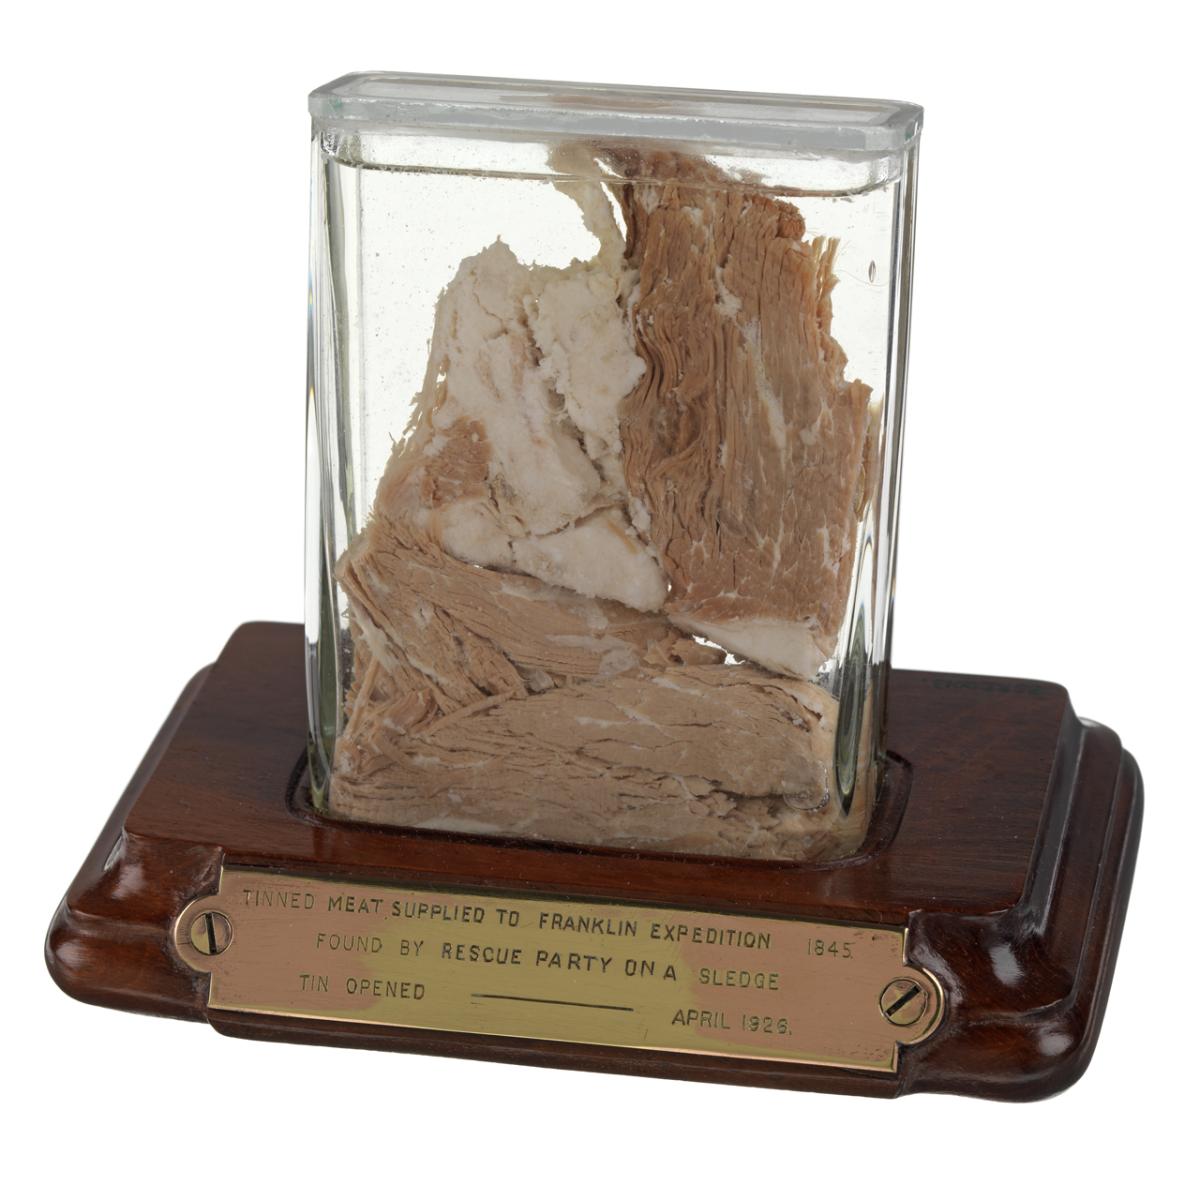 A clear glass display case containing a piece of preserved meat. The inscription reads 'TINNED MEAT SUPPLIED TO THE FRANKLIN EXPEDITION 1845. FOUND BY RESCUE PARTY ON A SLEDGE. TIN OPENED-APRIL 1926'